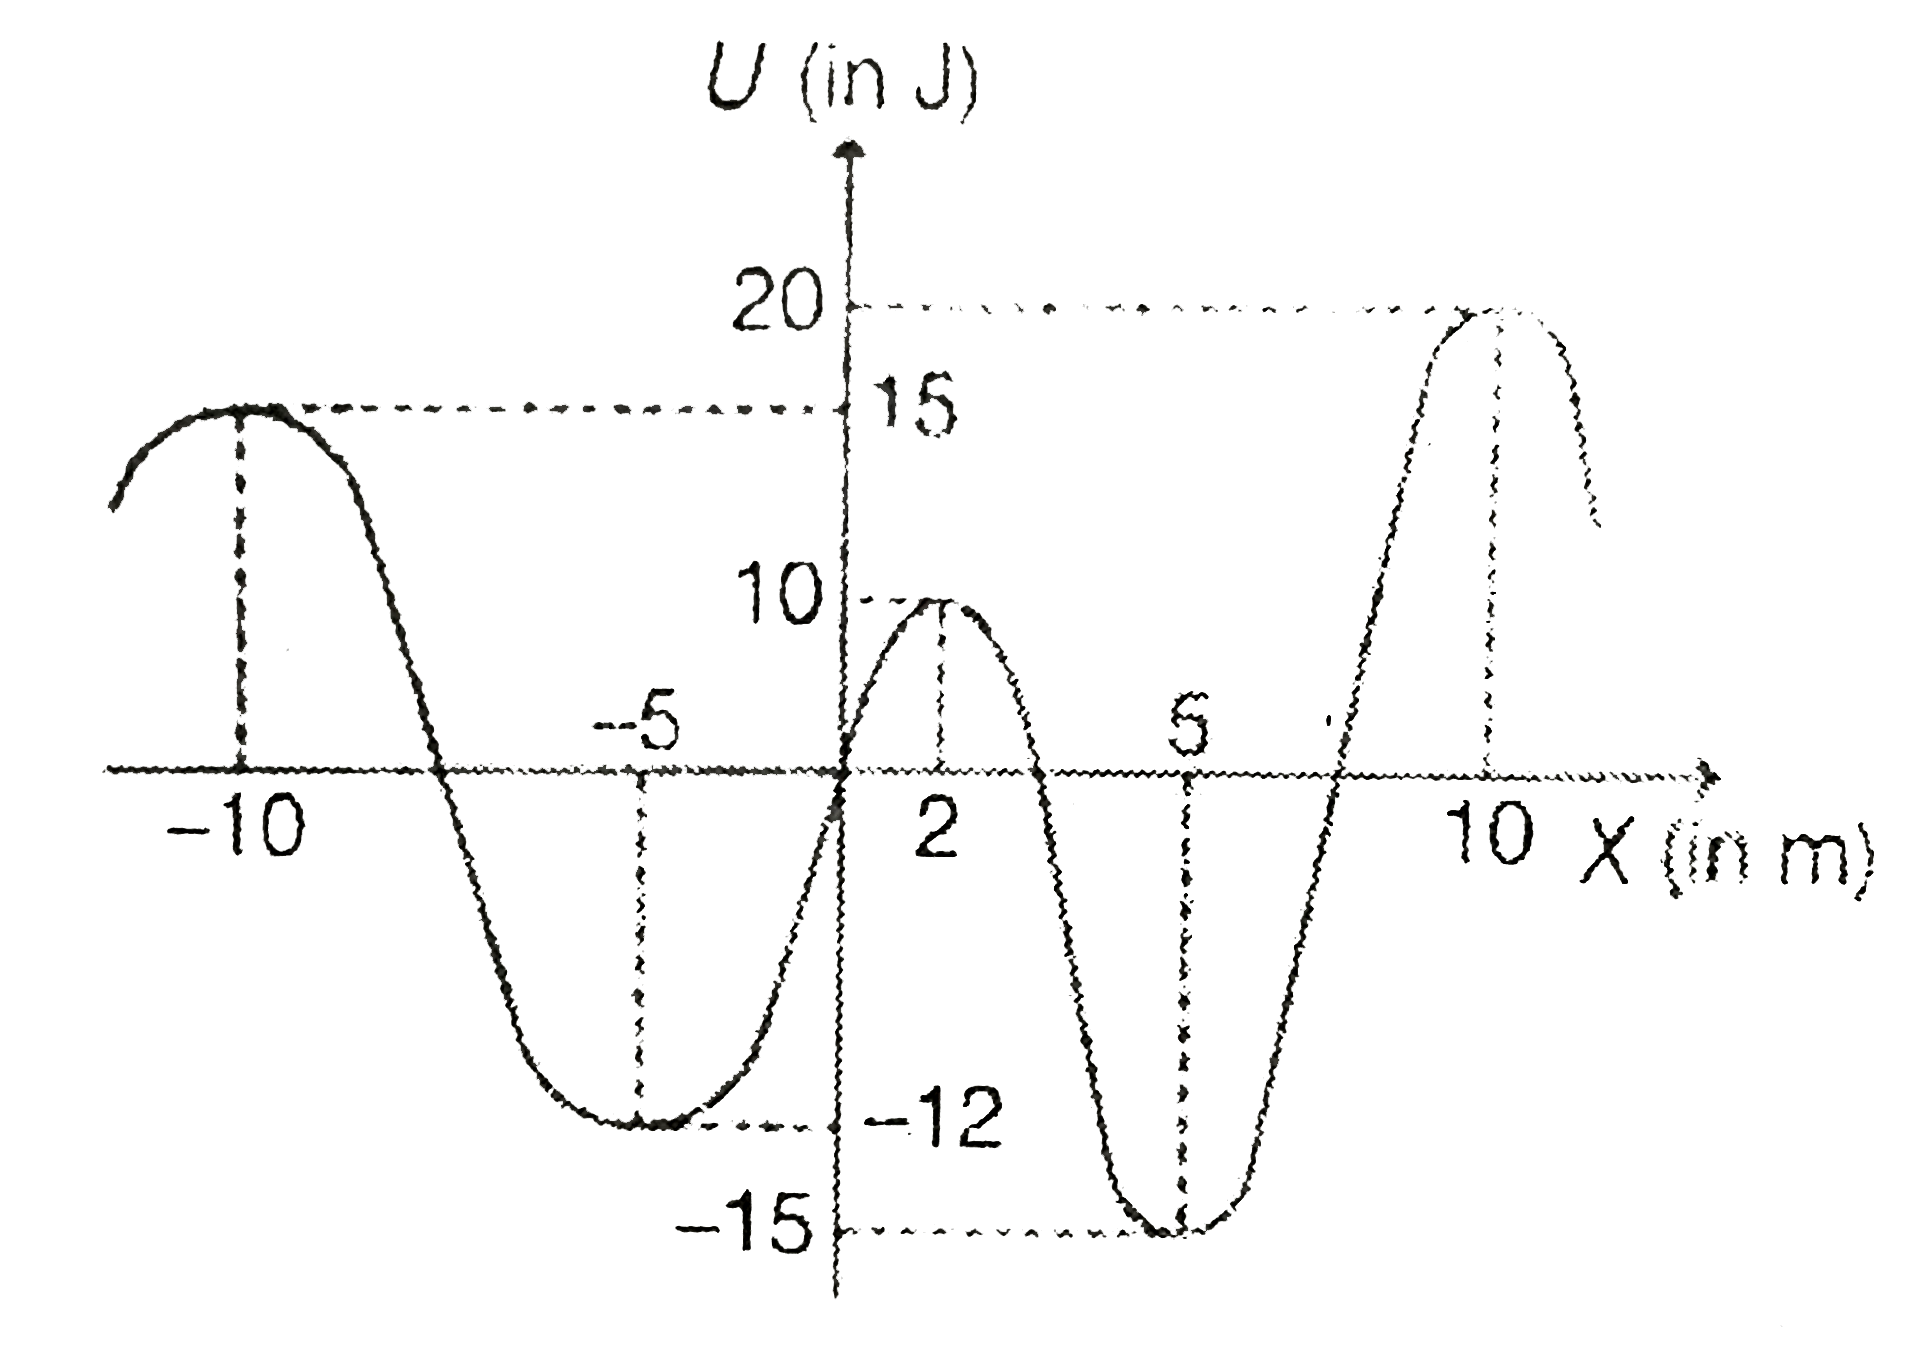 In the figure, the variation of potential energy of a particle of mass m = 2kg is represented with respect to its x-coordinate. The particle moves under the effect of this conservative force along the X-axis.        If the particle is released at the origin, then